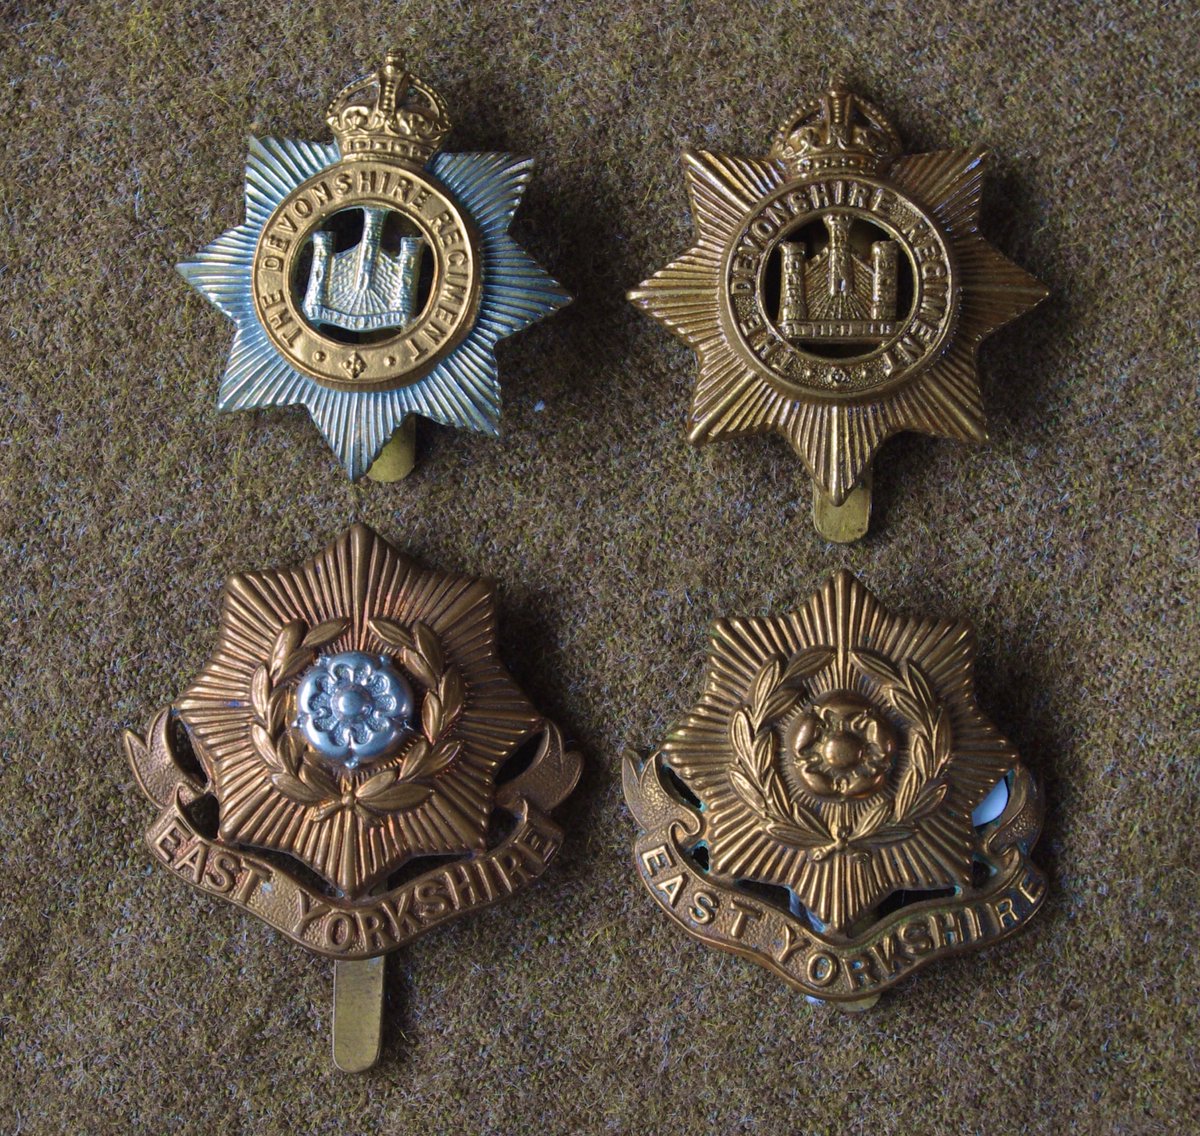 Cap Badges of the First World War: Some multi-part badges, where one metal was laid on another, were simplified to brass (‘gilding metal’). This wasn’t to save on nickel - it was to reduce manufacturing steps. Here, Devonshire & East Yorkshire regiments  #WW1  #FWW